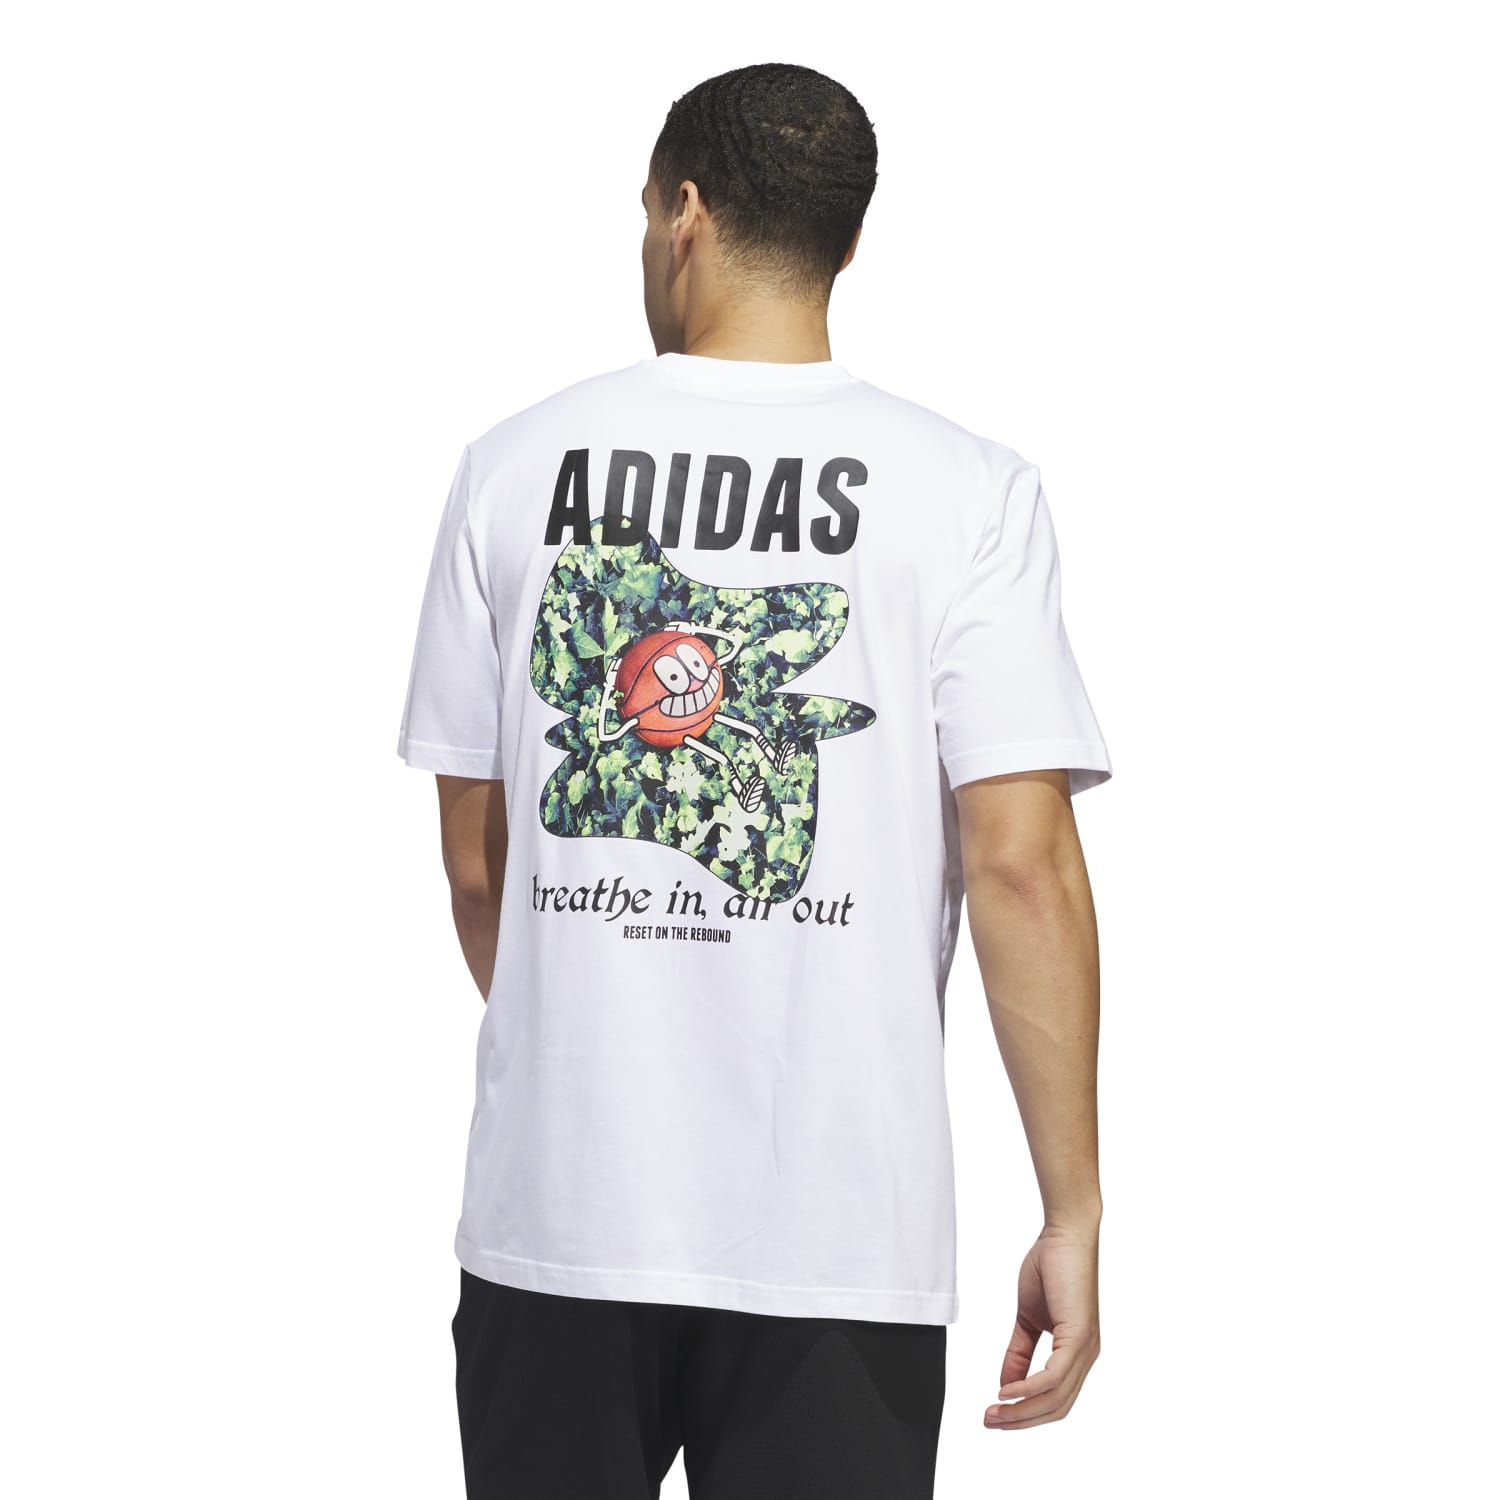 Adidas FY3729 Basketball Men Lil Stripe Photoreal Graphic Tee White IN6376 - T - SHIRTS Canada